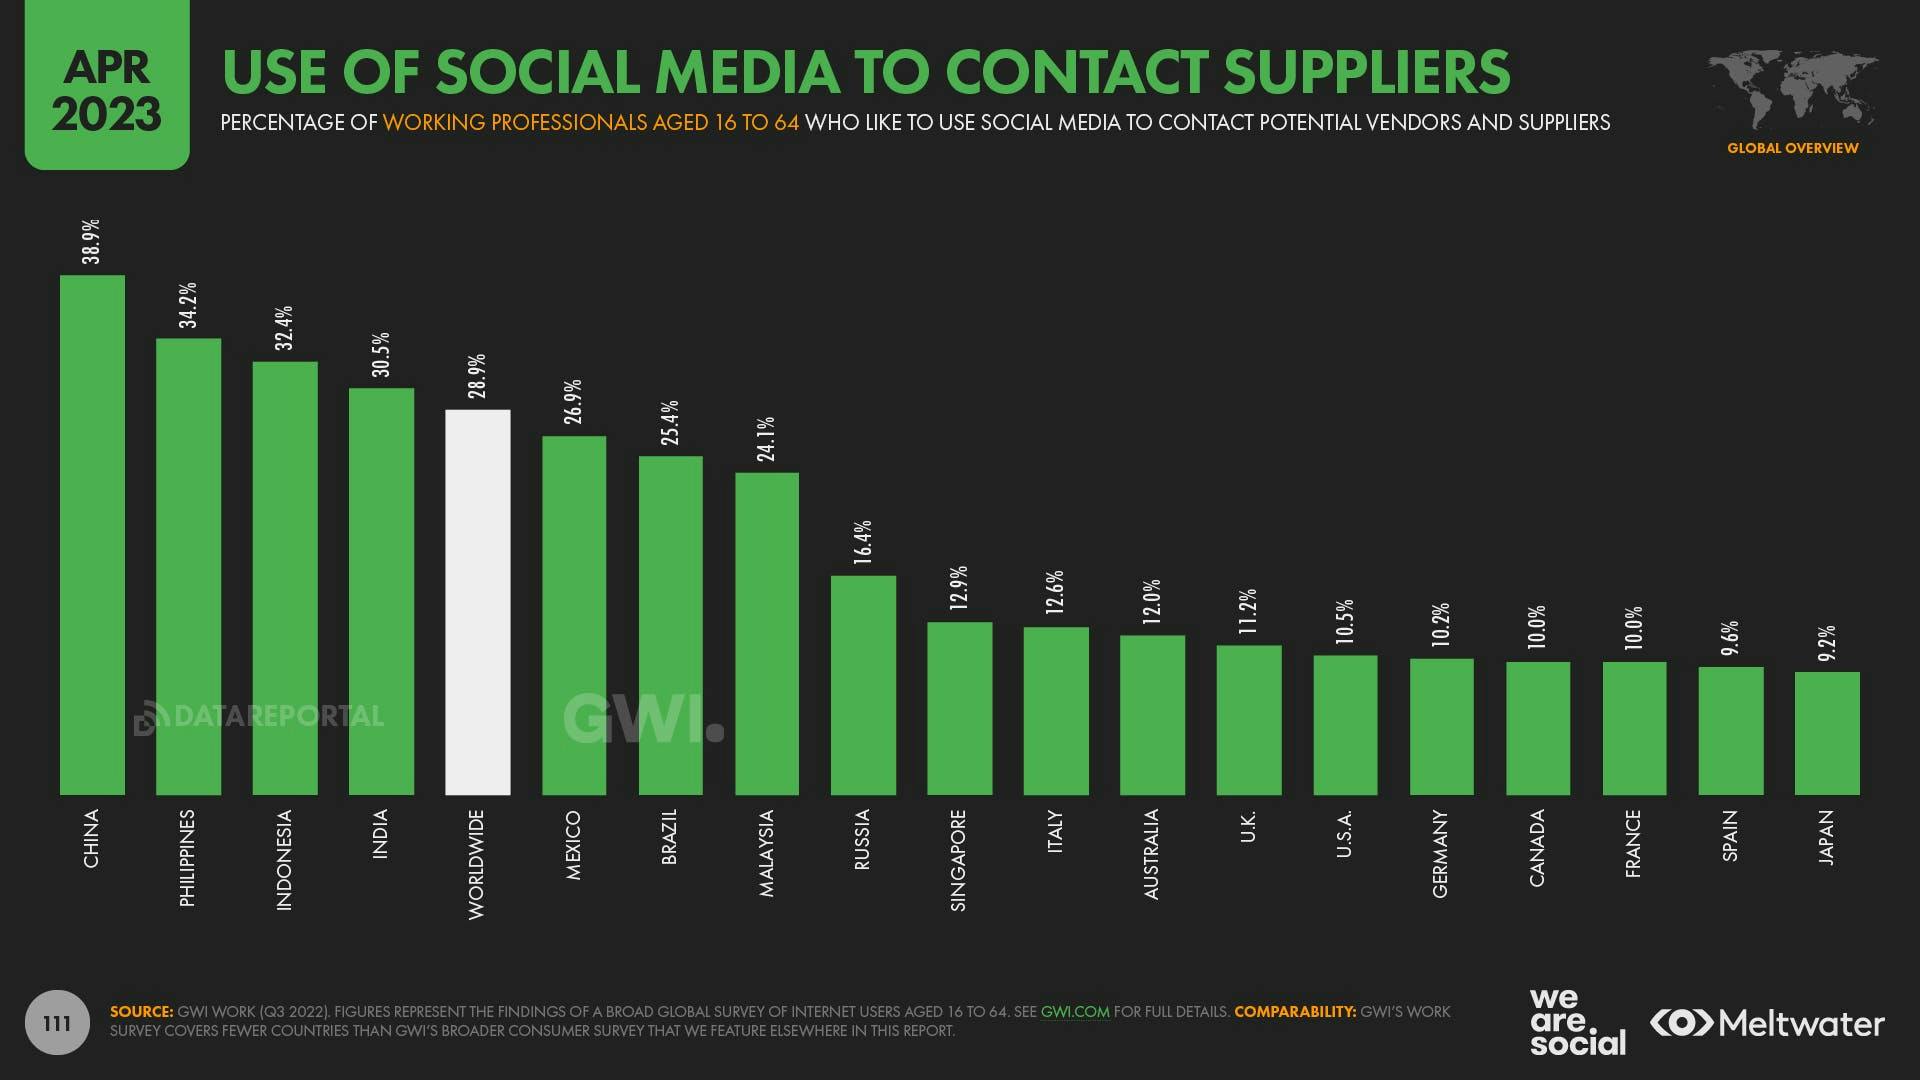 April 2023 Global State of Digital Report: Use of Social Media to Contact Suppliers